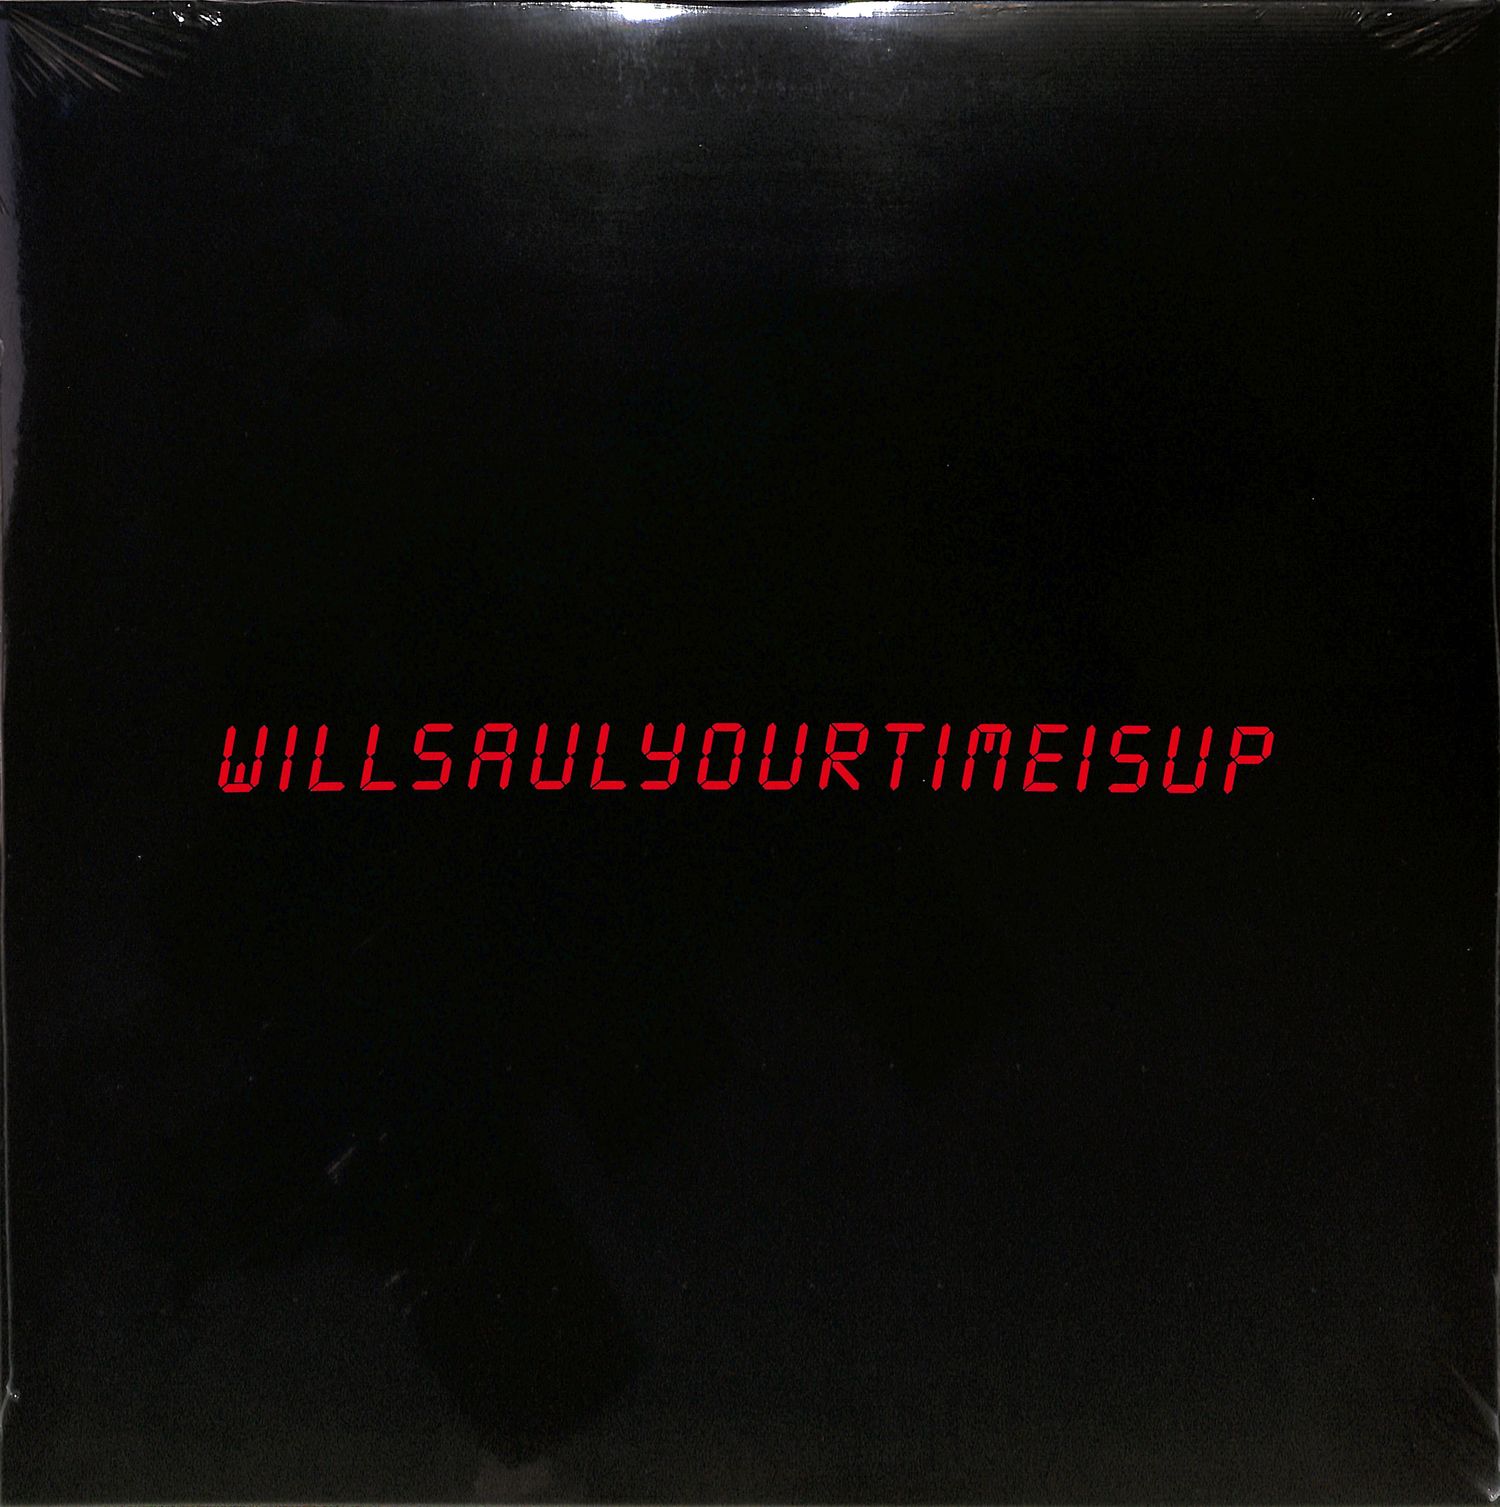 Will Saul - YOUR TIME IS UP 